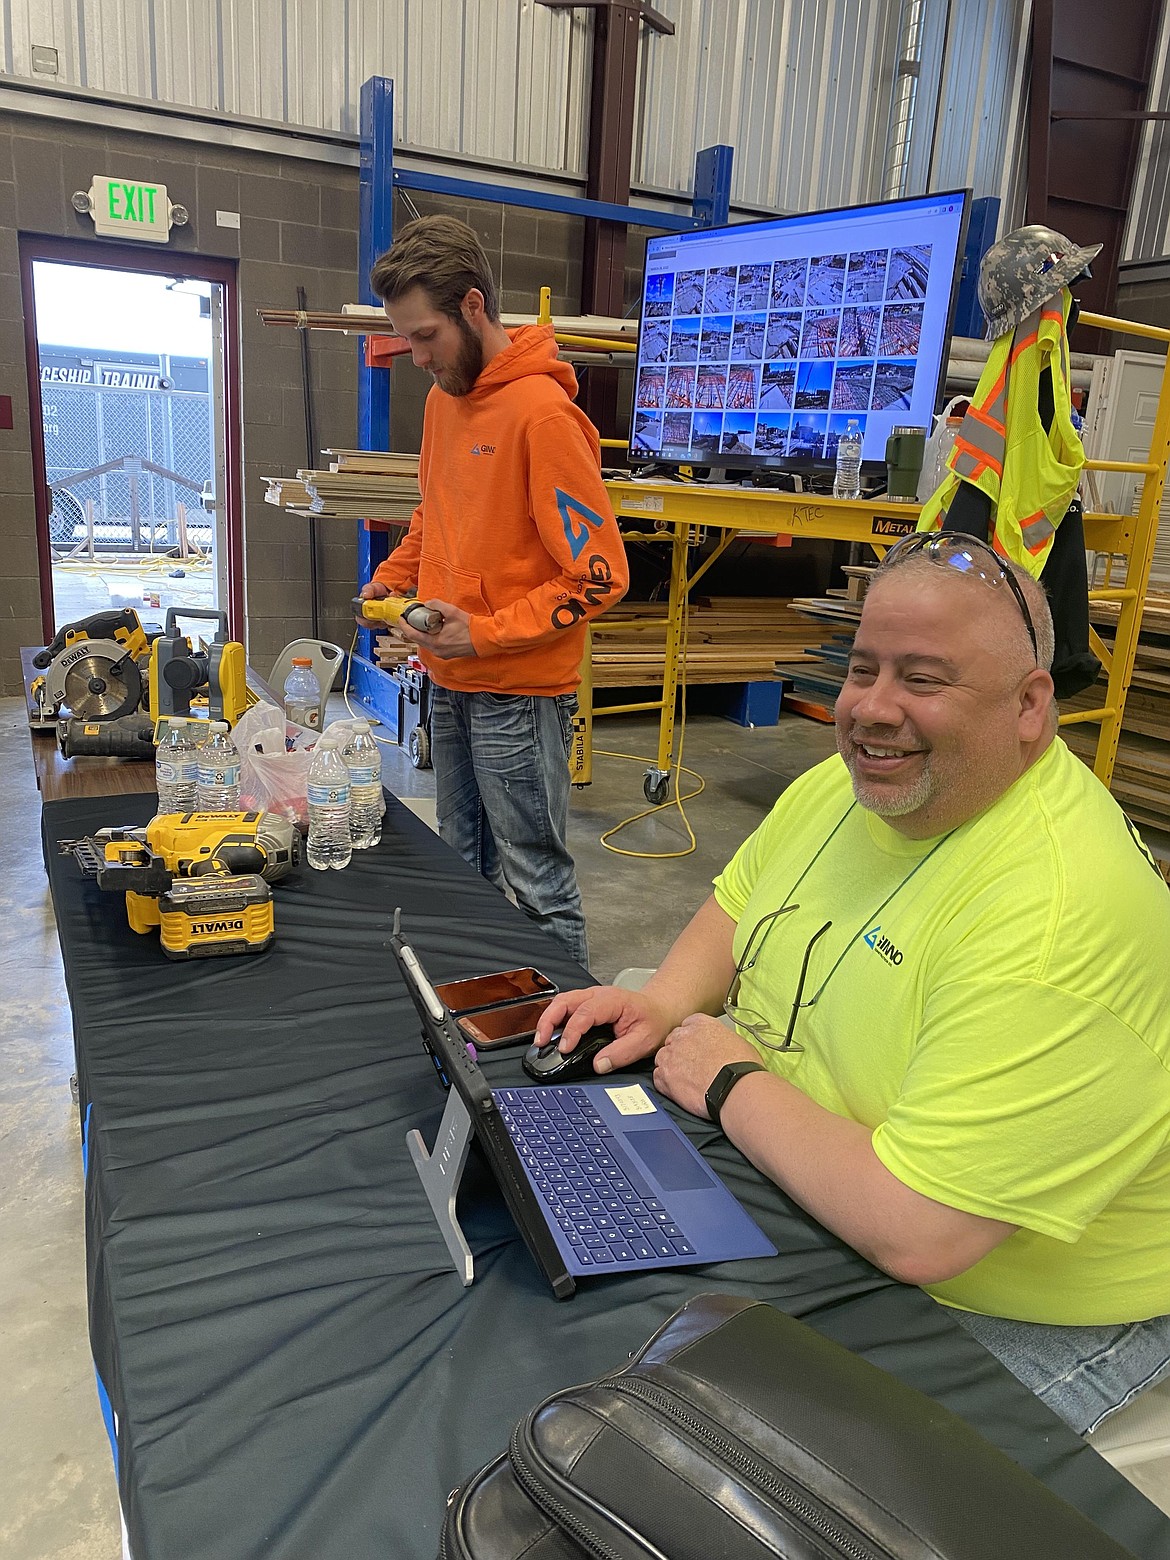 From left: Ginno Construction employees Robert Torgerson and Greg Rodriguez at the Post Falls Chamber Hard Hats, Hammers and Hot Dogs event Friday at Kootenai Technical Education Center.